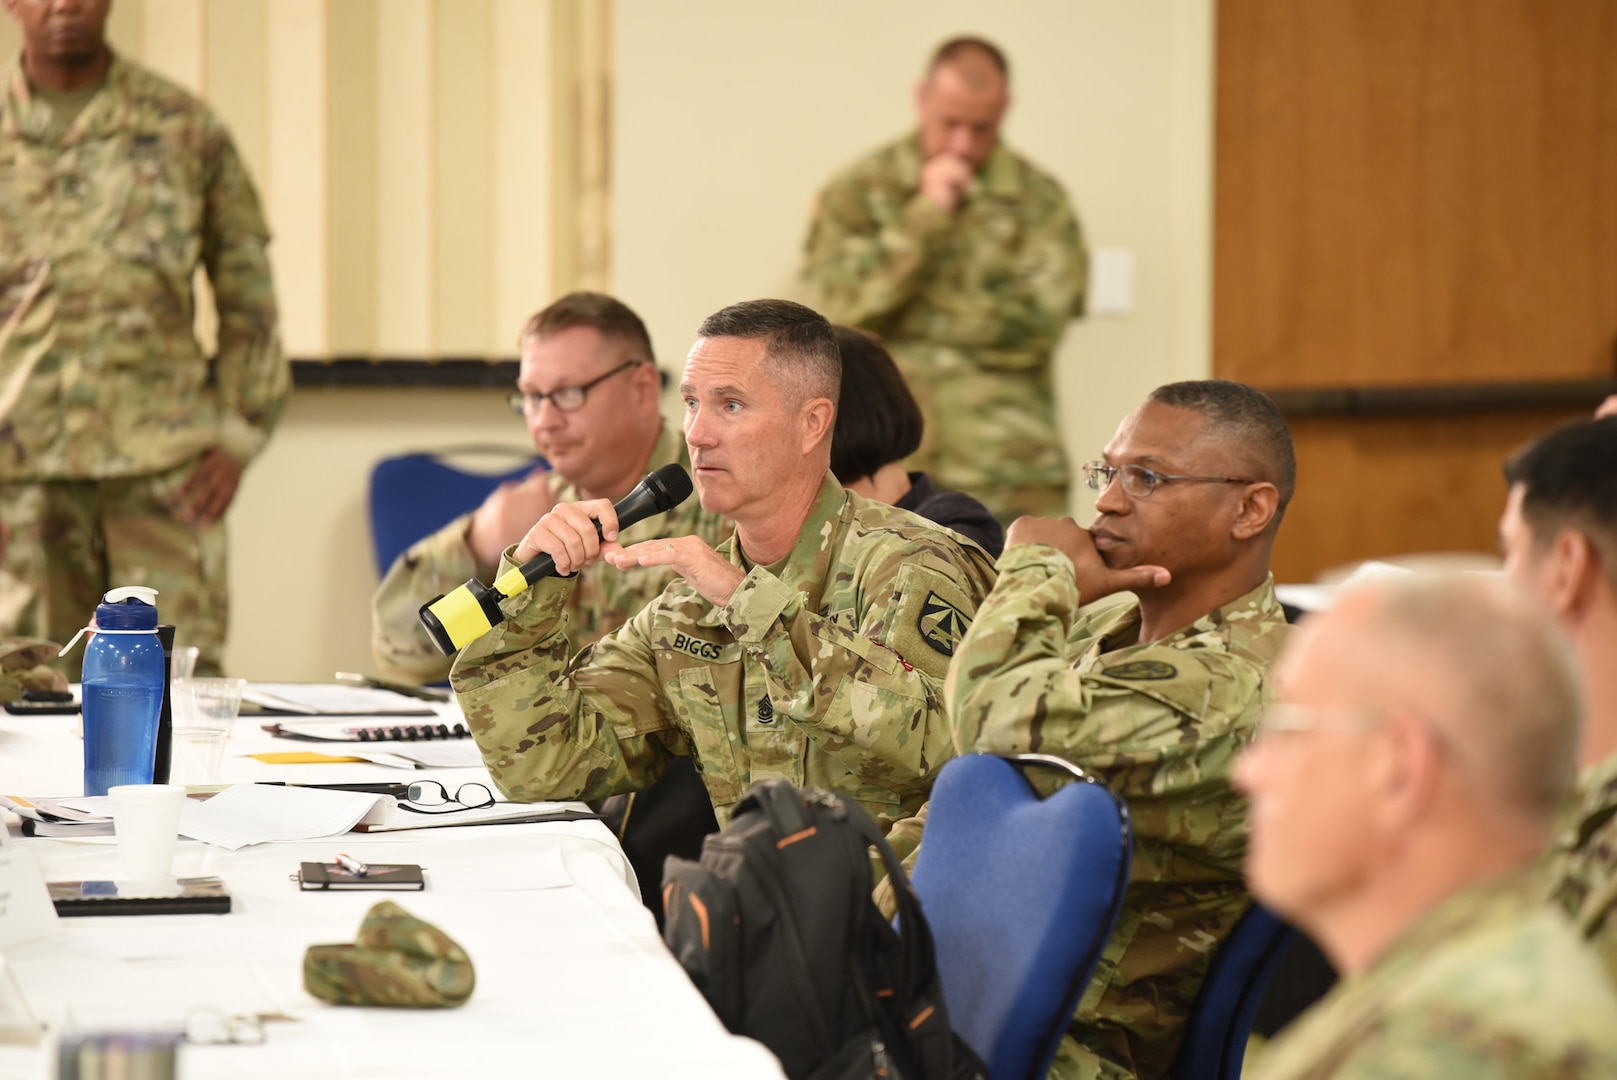 Command Sgt. Maj. Paul Biggs, Future and Concepts Center, U.S. Army Futures Command (center left), asking a question while Command Sgt. Maj. Michael Gragg, U.S. Army Medical Command, looks on.